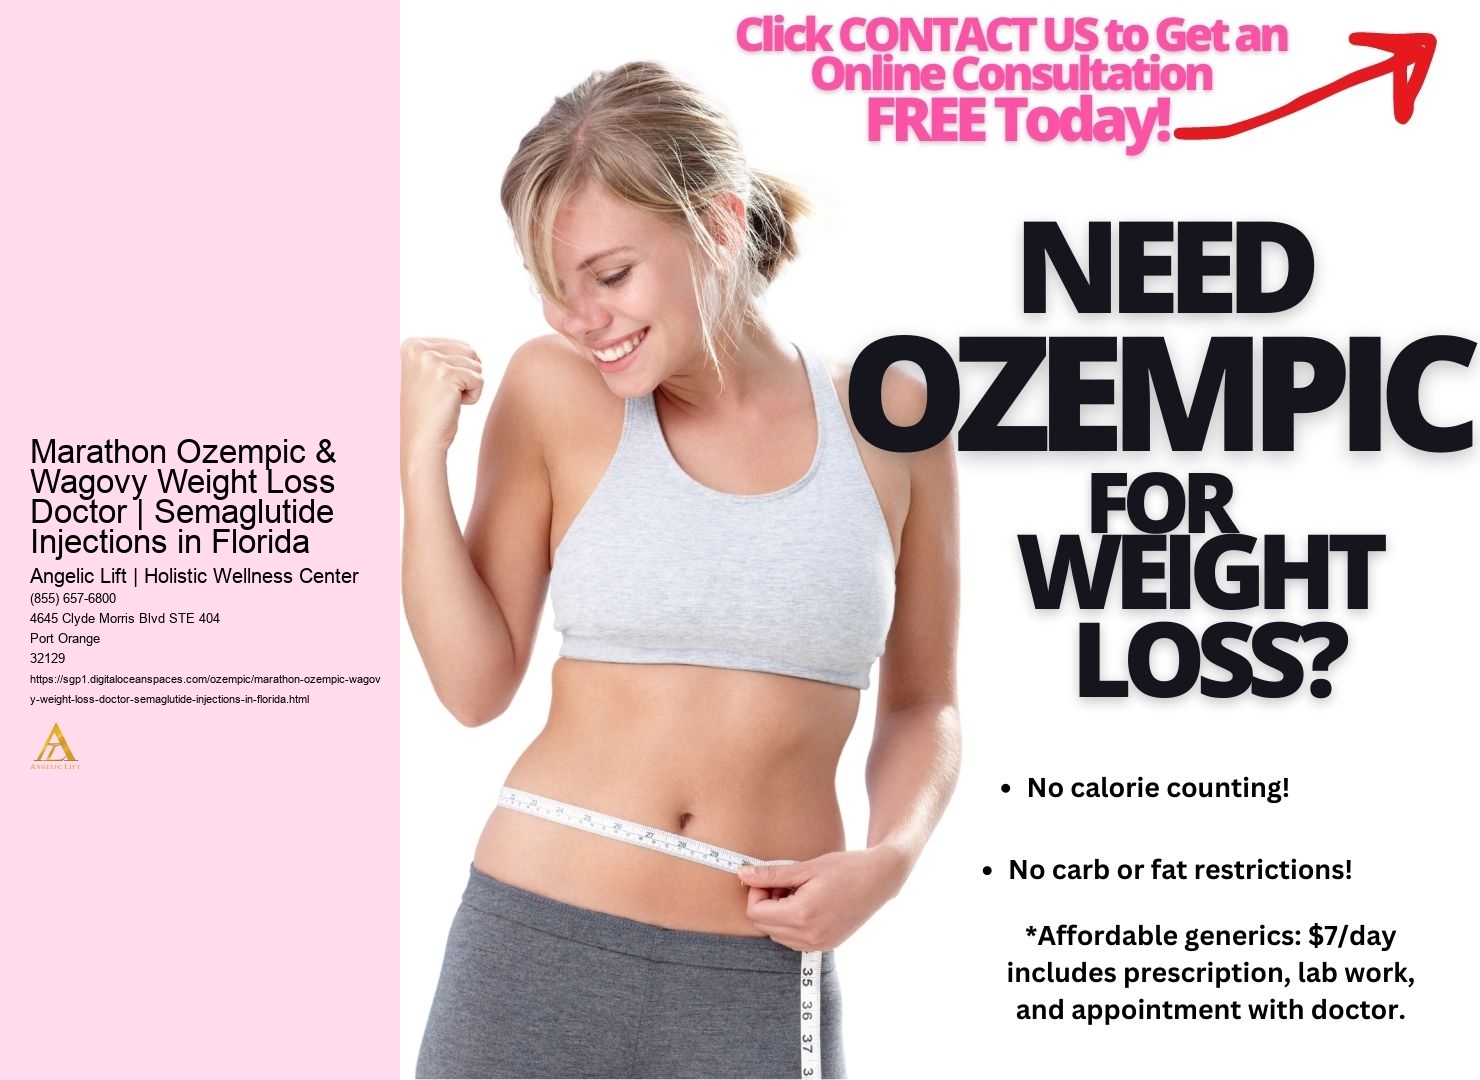 Marathon Ozempic & Wagovy Weight Loss Doctor | Semaglutide Injections in Florida